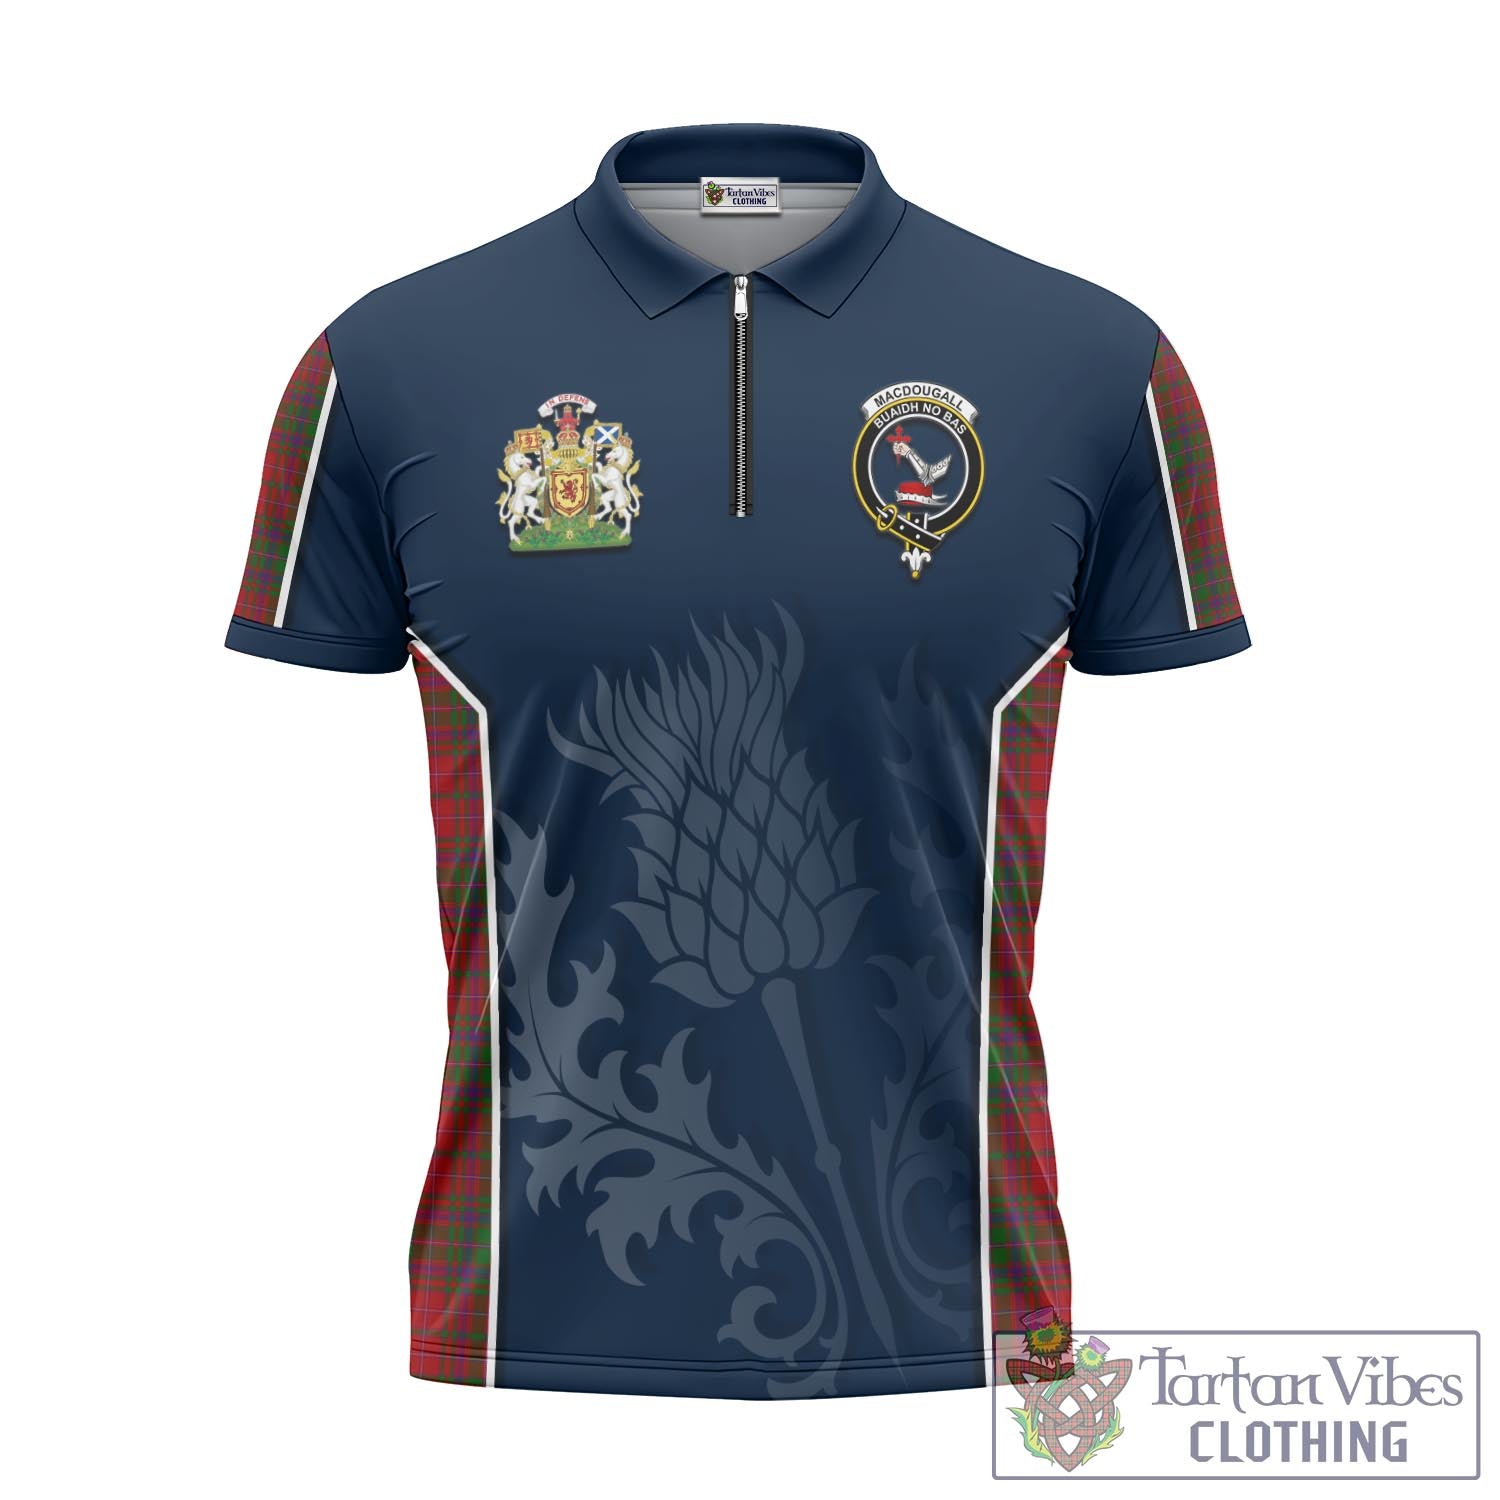 Tartan Vibes Clothing MacDougall Tartan Zipper Polo Shirt with Family Crest and Scottish Thistle Vibes Sport Style